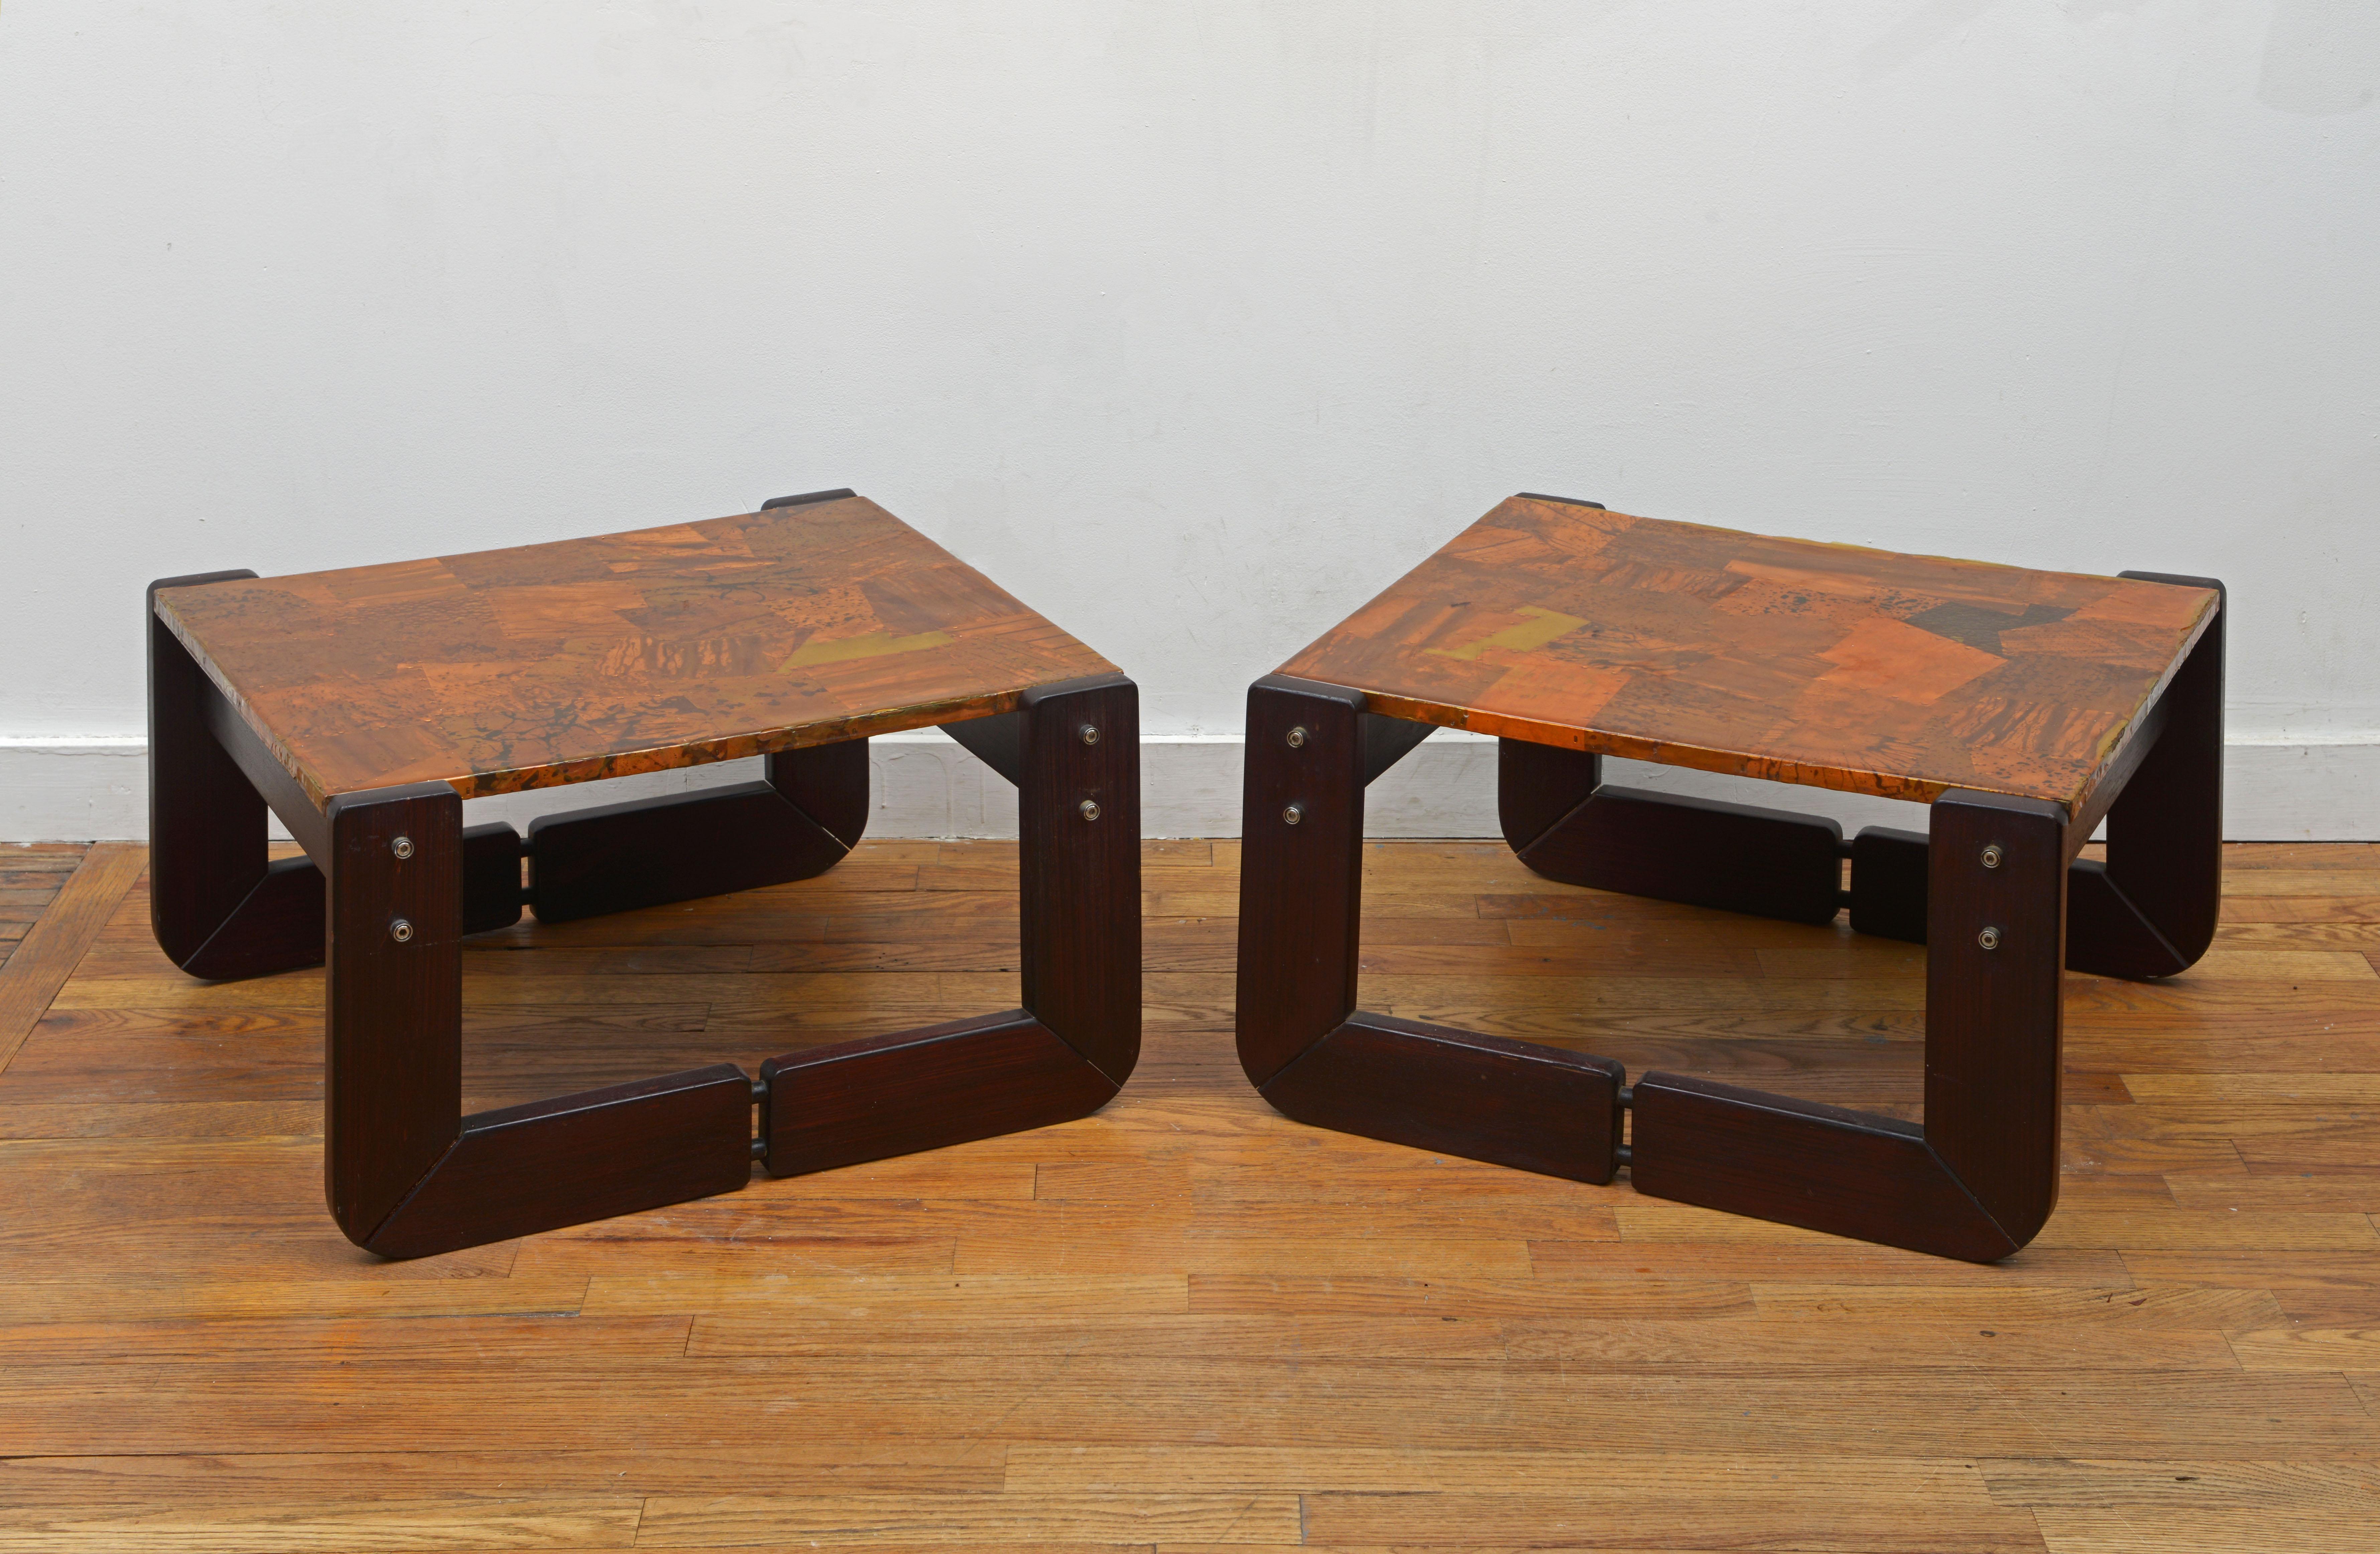 One incredible pair of Percival Lafer copper patchwork with solid rosewood frames end tables 1970s (Signed with Lafer MP Made in Brazil label). These Brazilian modern beauties feature removable tops and hardware on all corners to tighten up the